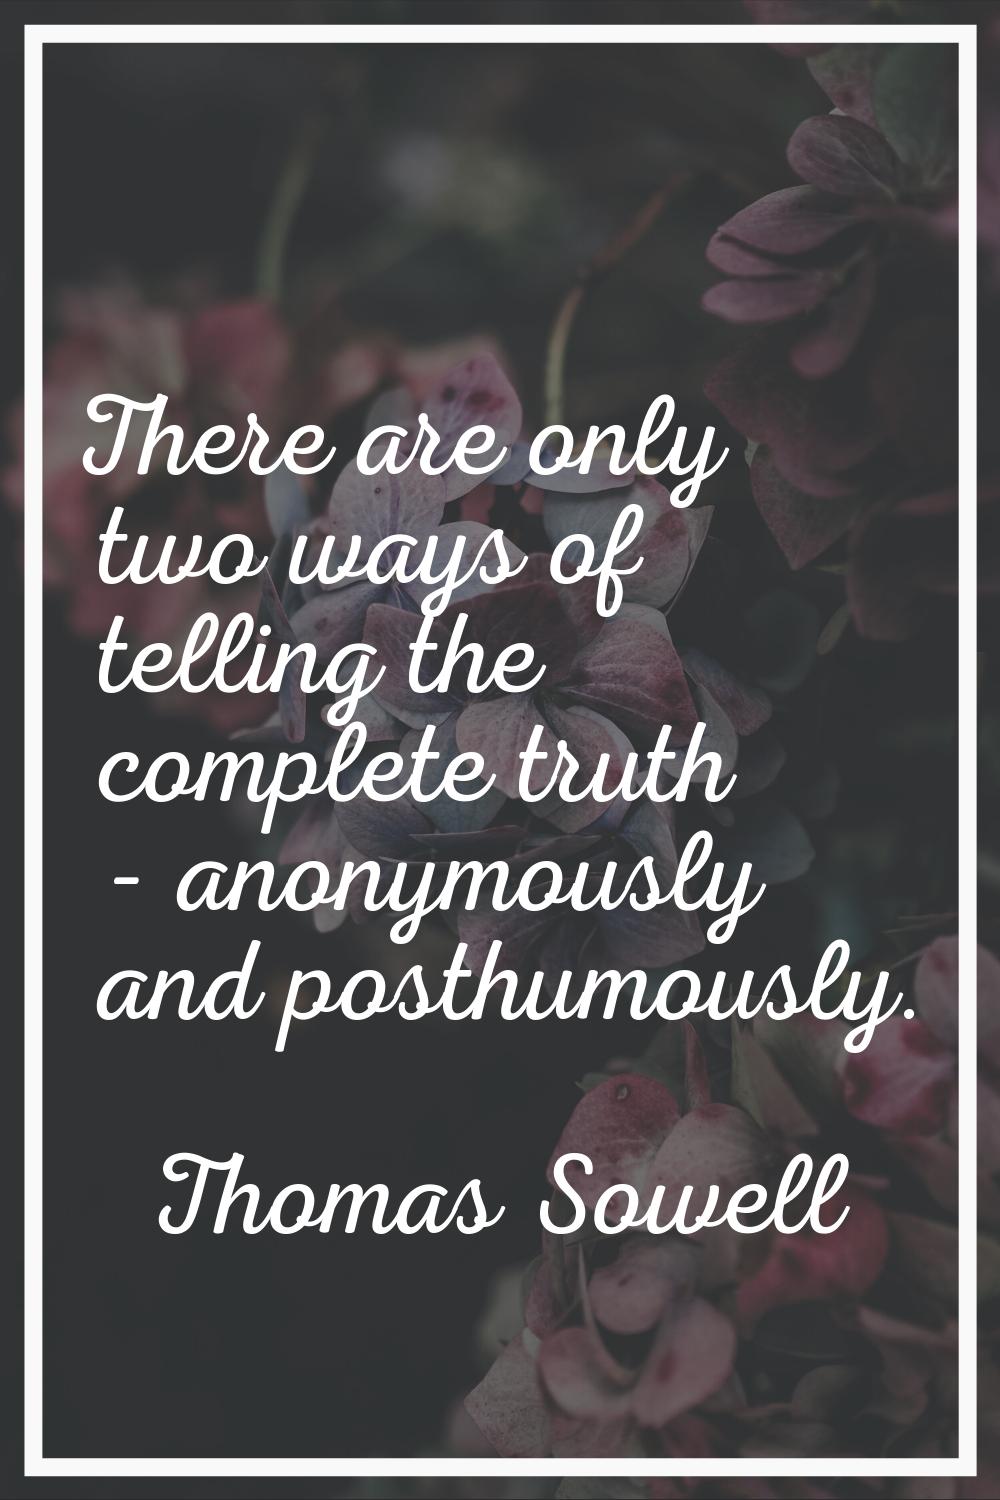 There are only two ways of telling the complete truth - anonymously and posthumously.